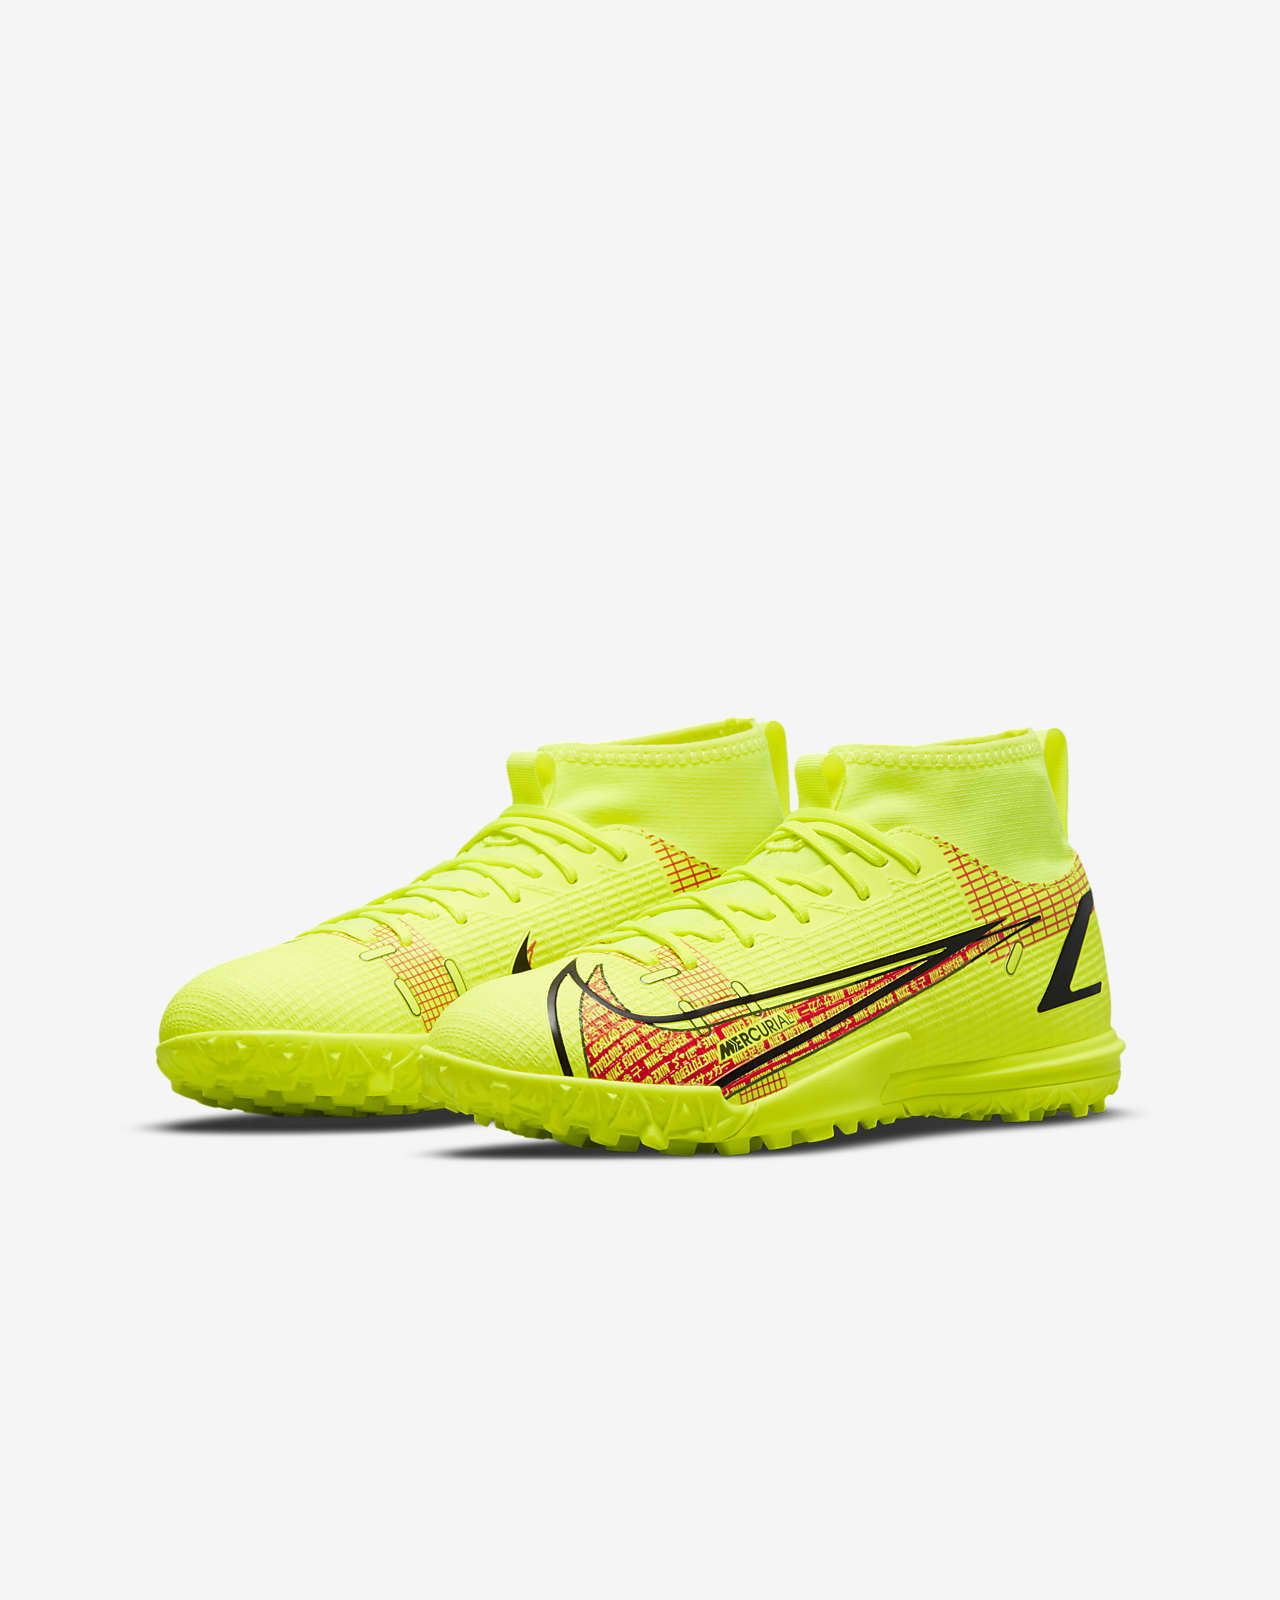 nike youth turf soccer cleats